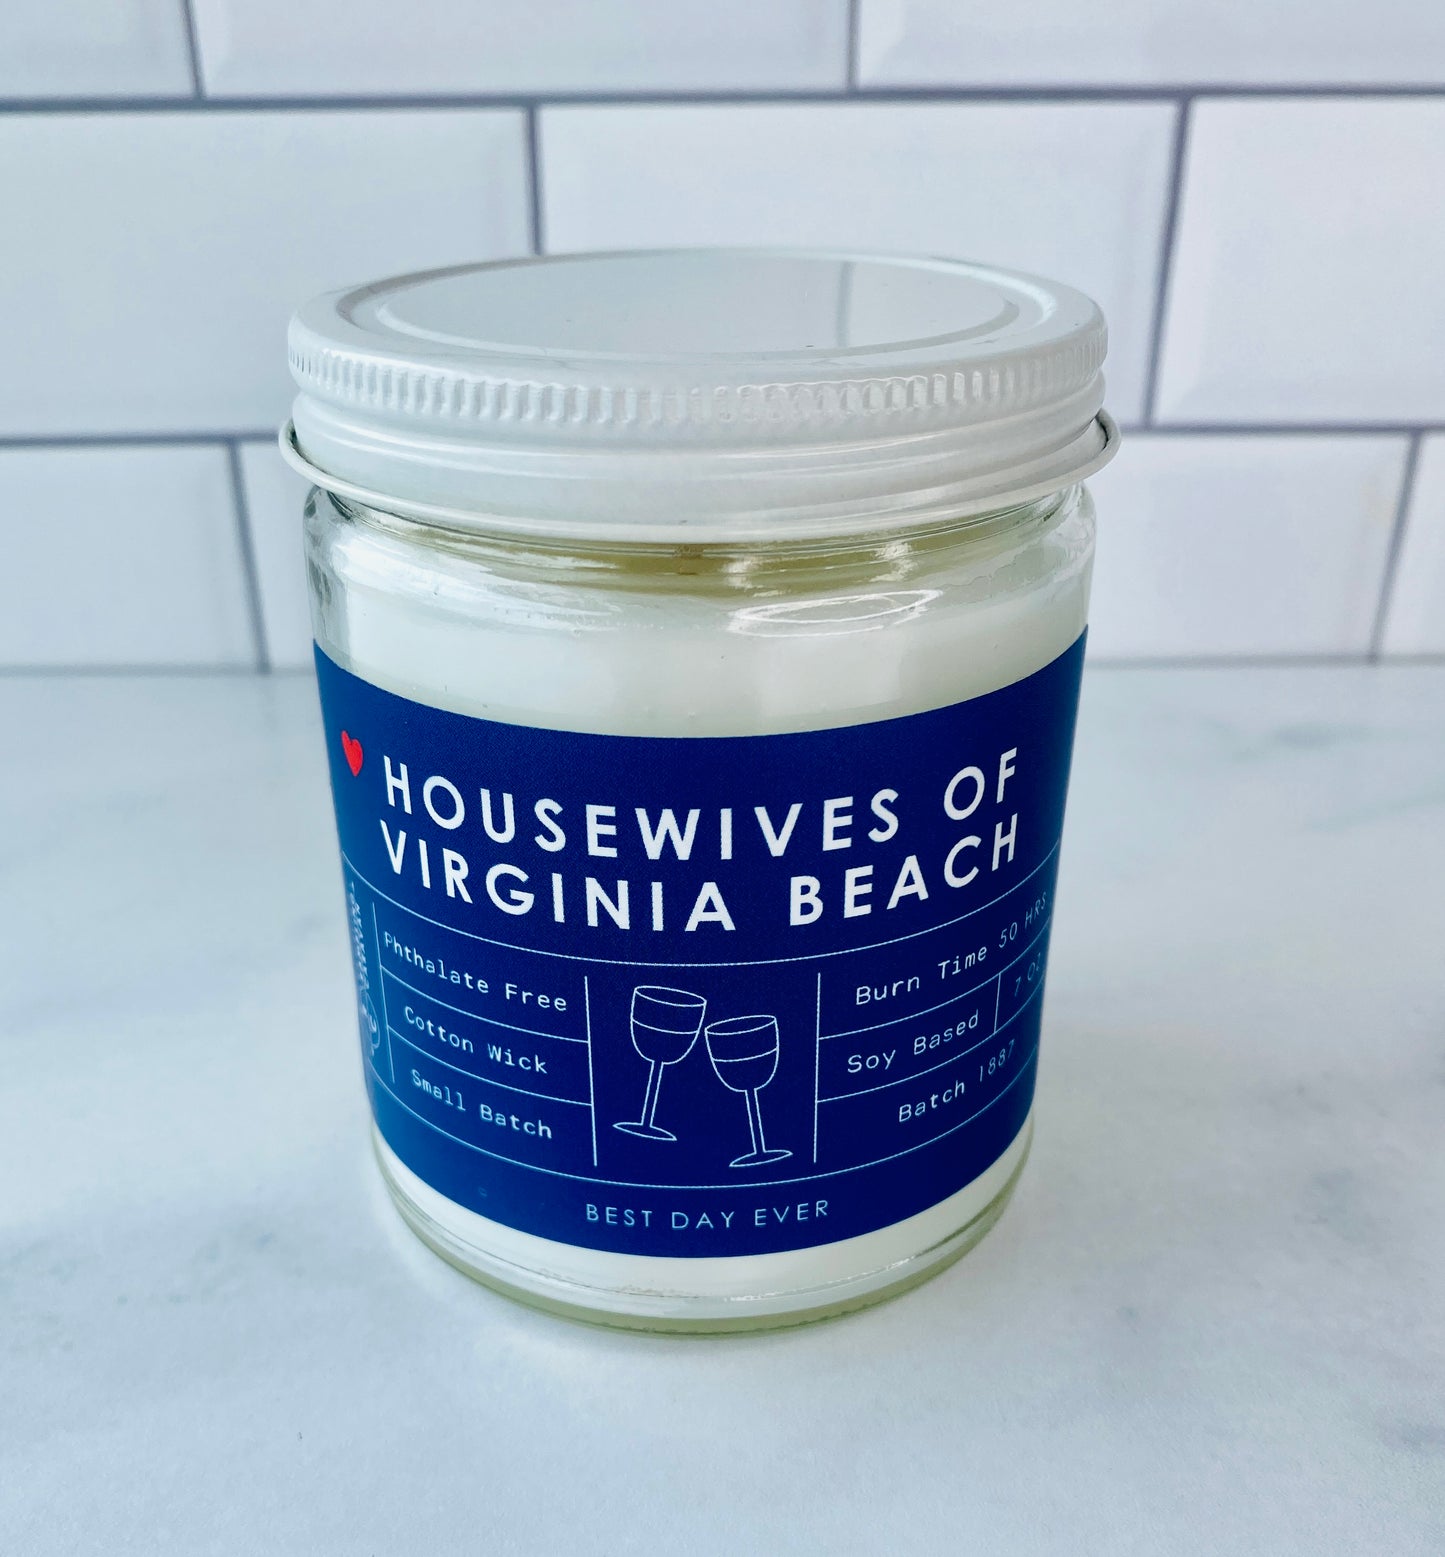 Housewives of Virginia Beach, VA Candle